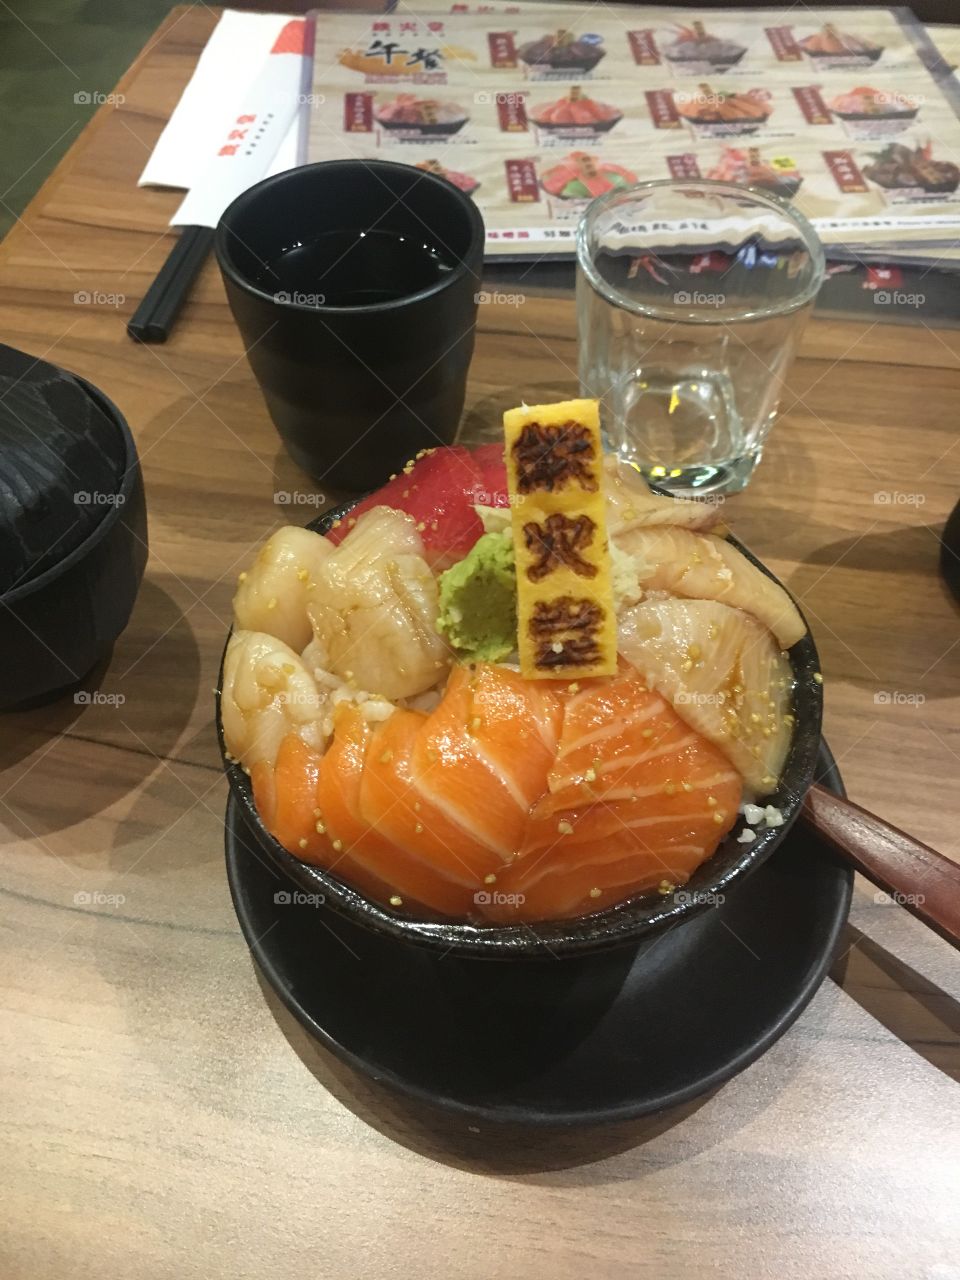 Delicious Chirashi bowl found in a hole in the wall, back alley place in the middle of Hong Kong.